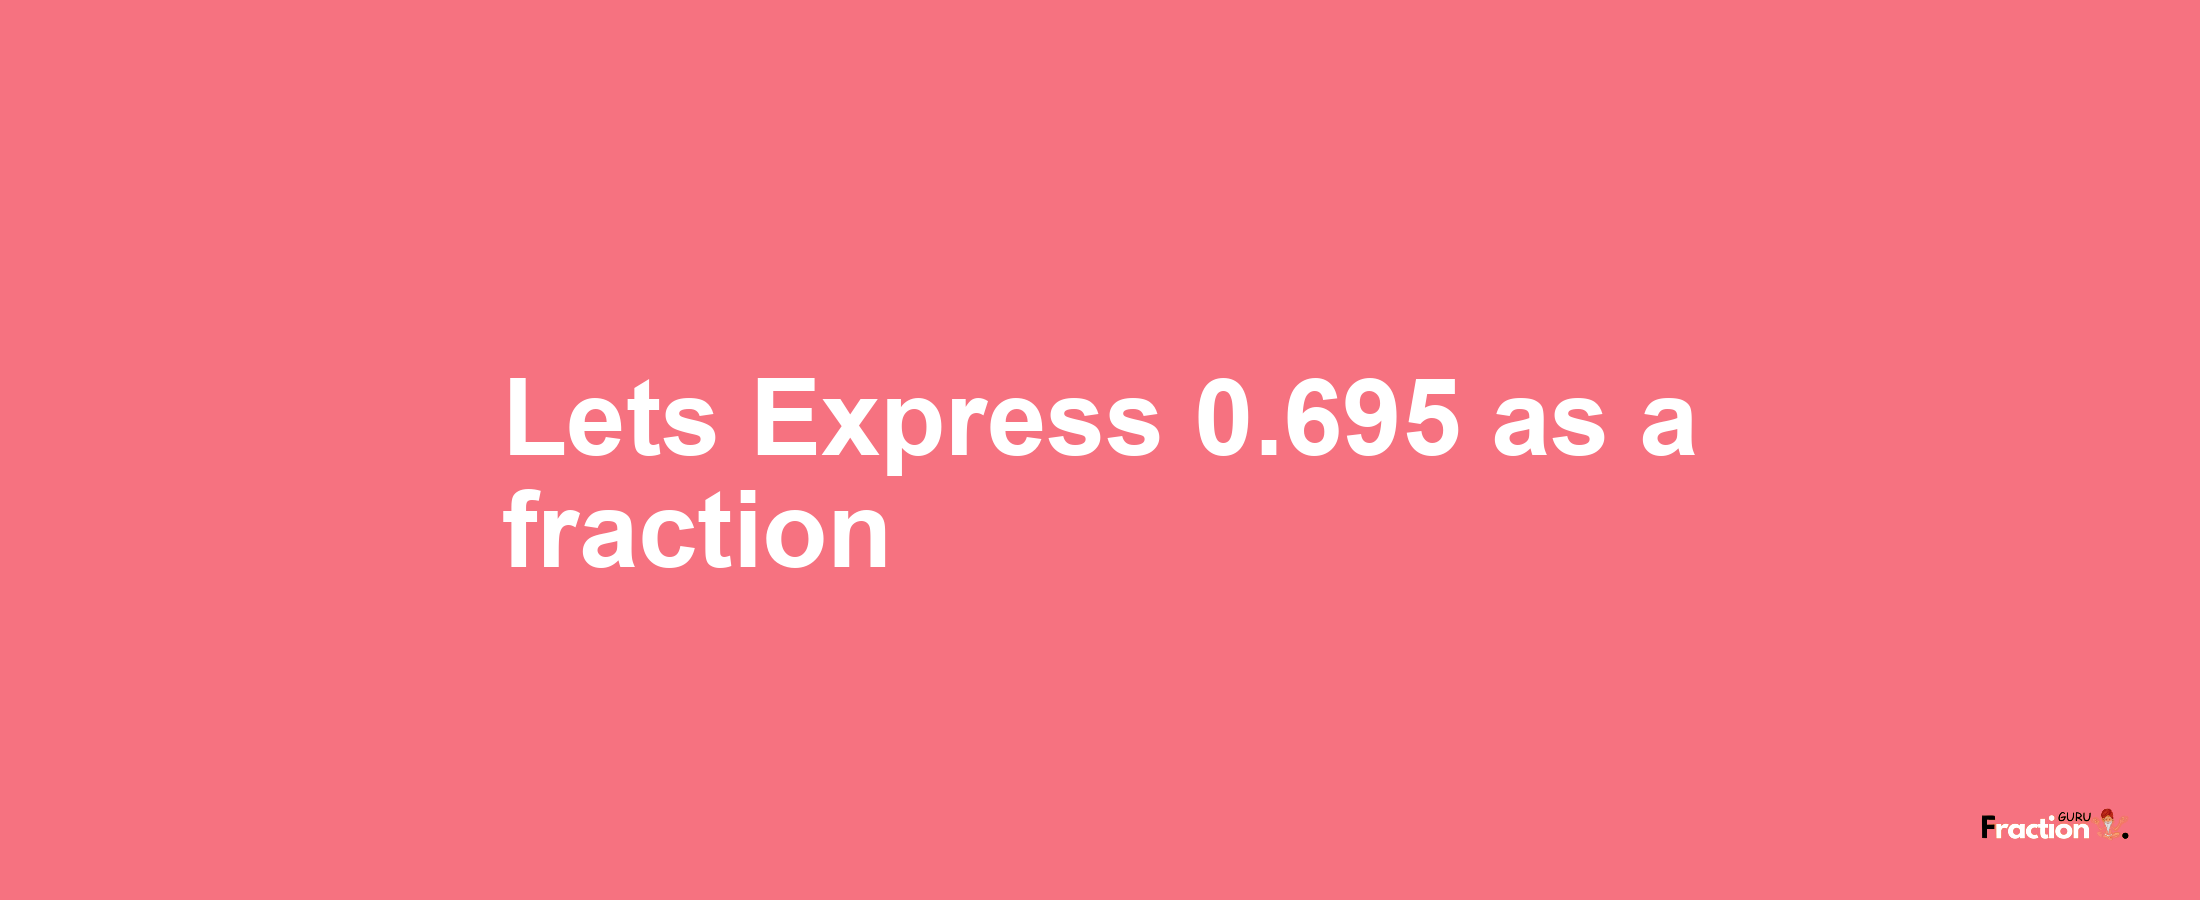 Lets Express 0.695 as afraction